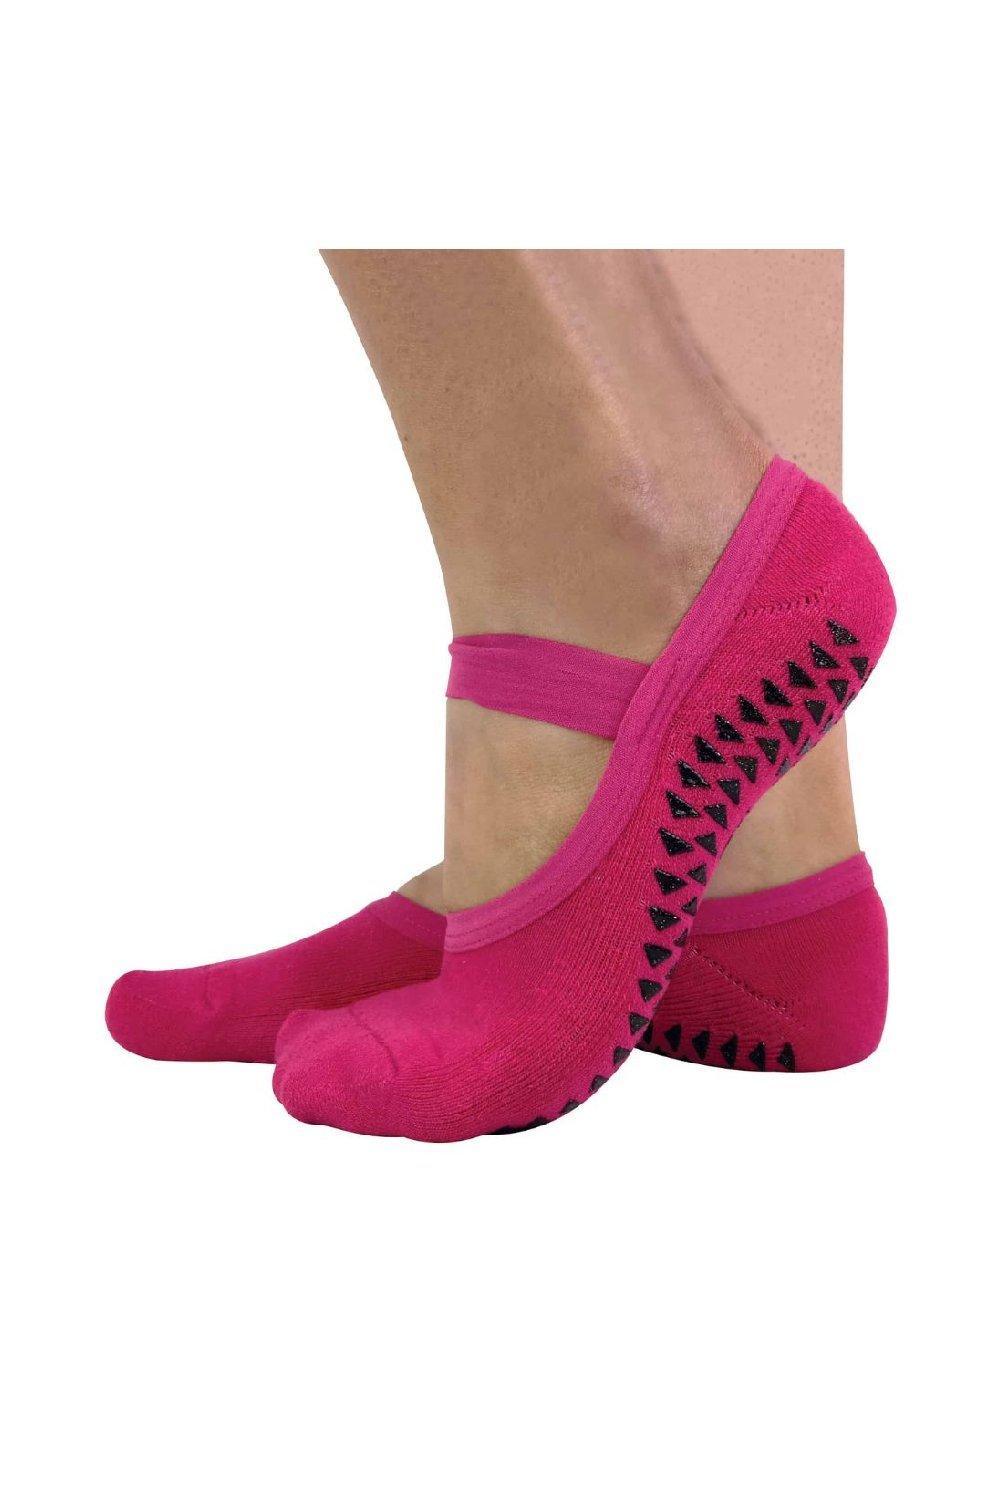 Sock Snob  Womens 2 Pairs Ladies Non Slip Grip Invisible Pilates Yoga Socks with Straps - Pink - Size 4-6.5